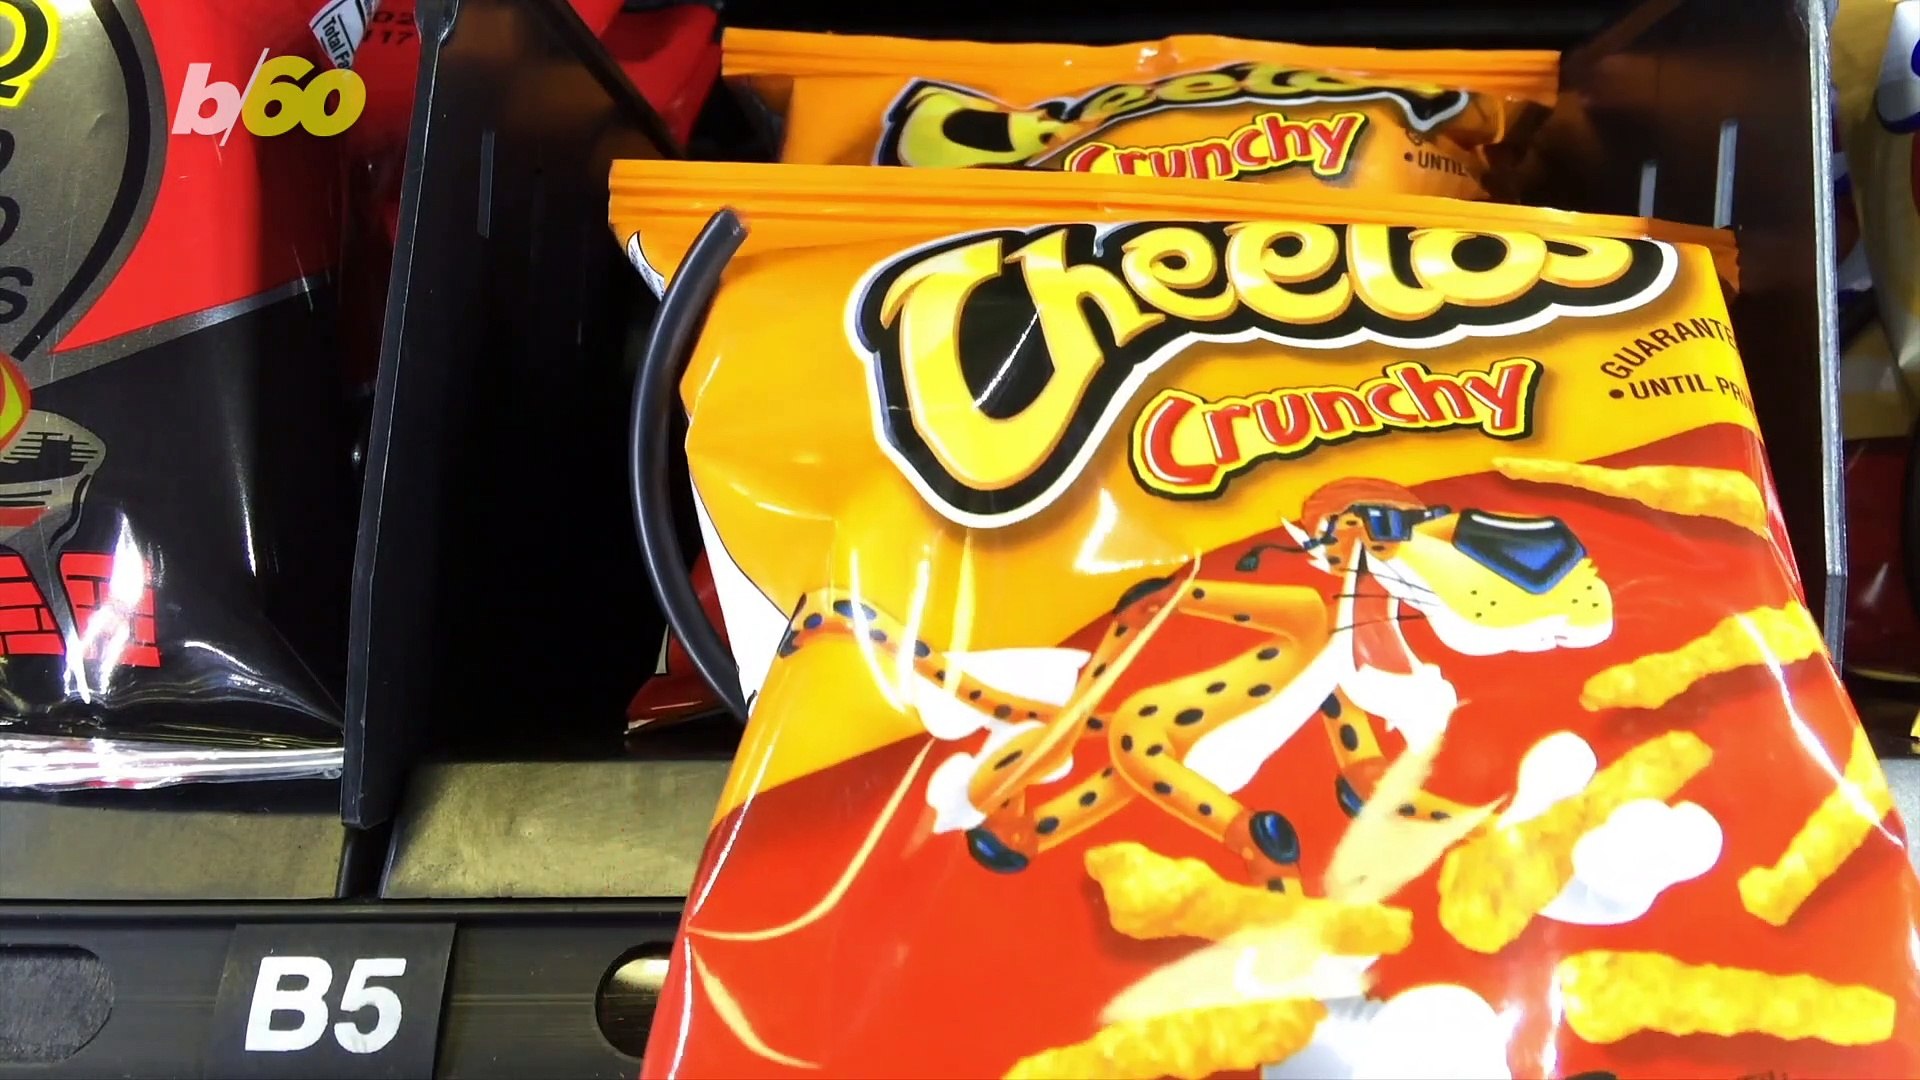 Now You Can Wear Cheetos Without Getting Covered In Cheese Dust